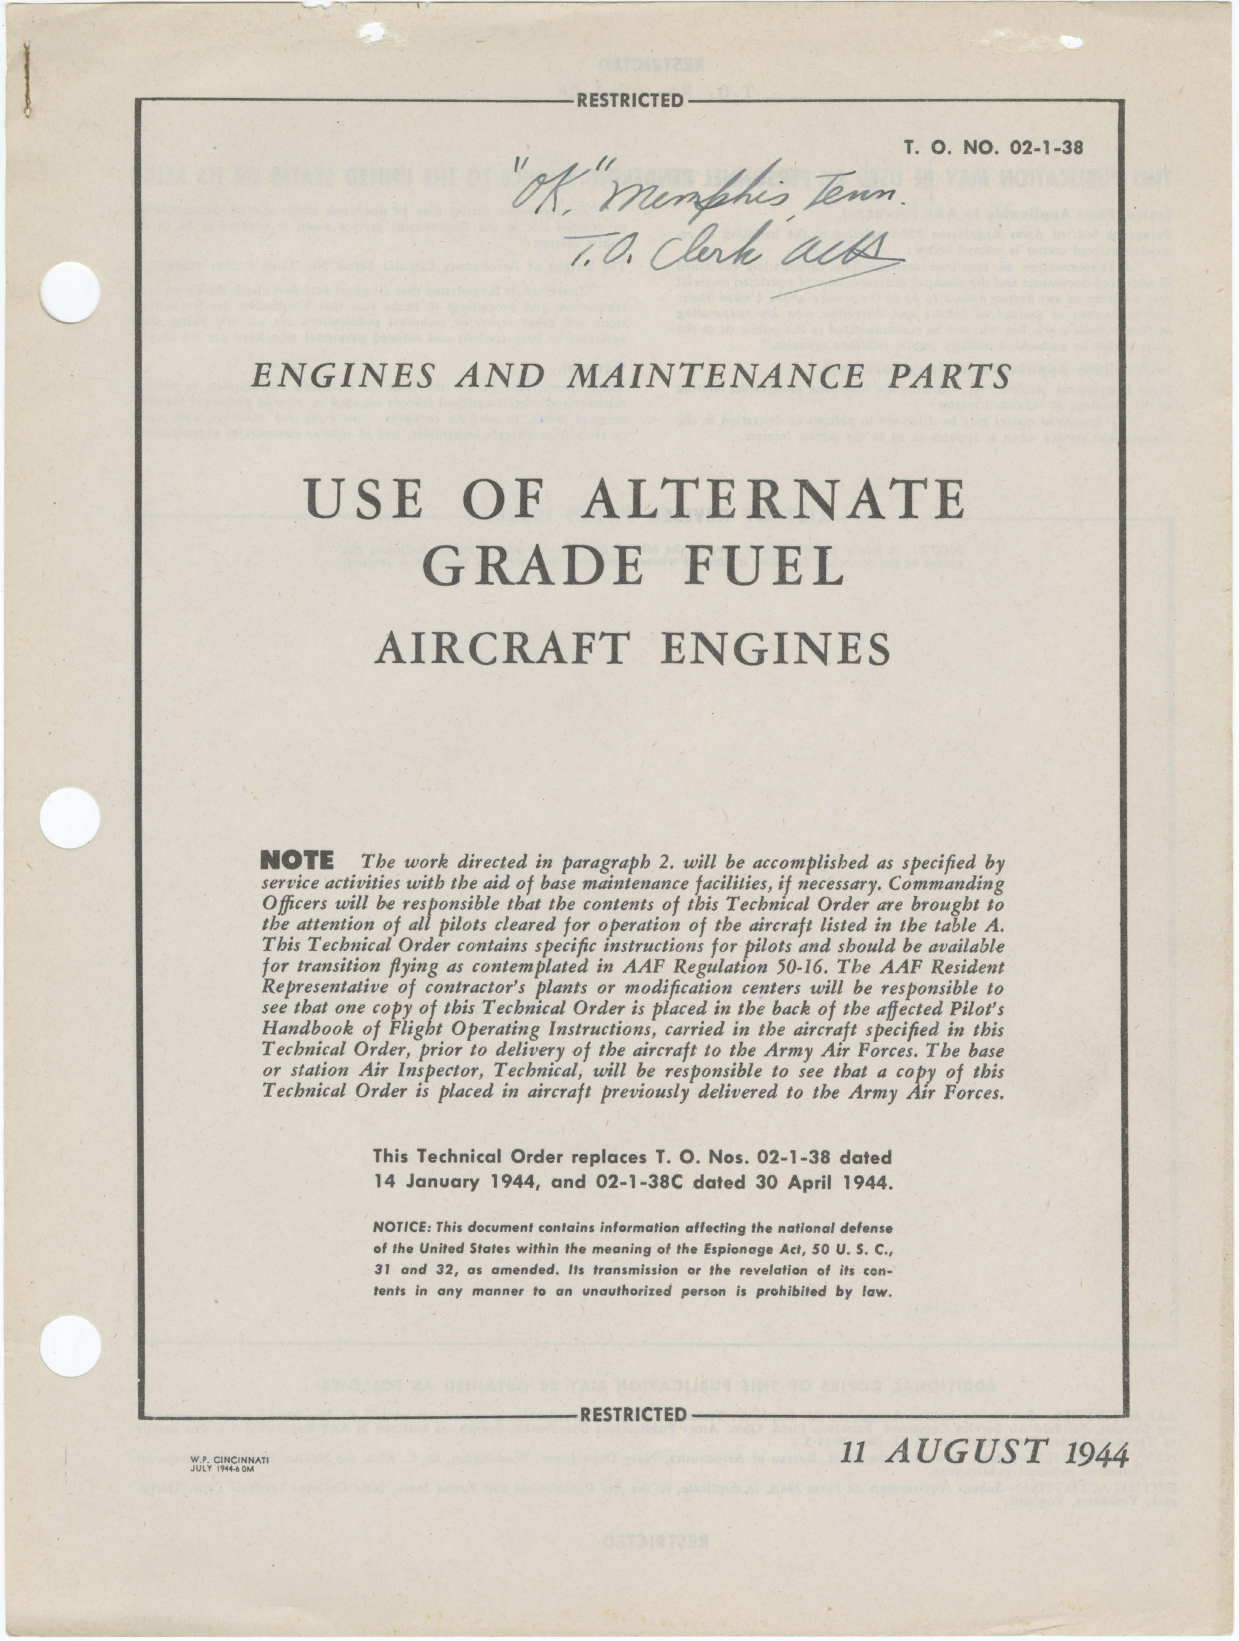 Sample page 1 from AirCorps Library document: Engines and Maintenance Parts - Use of Alternate Grade Fuel for Aircraft Engines